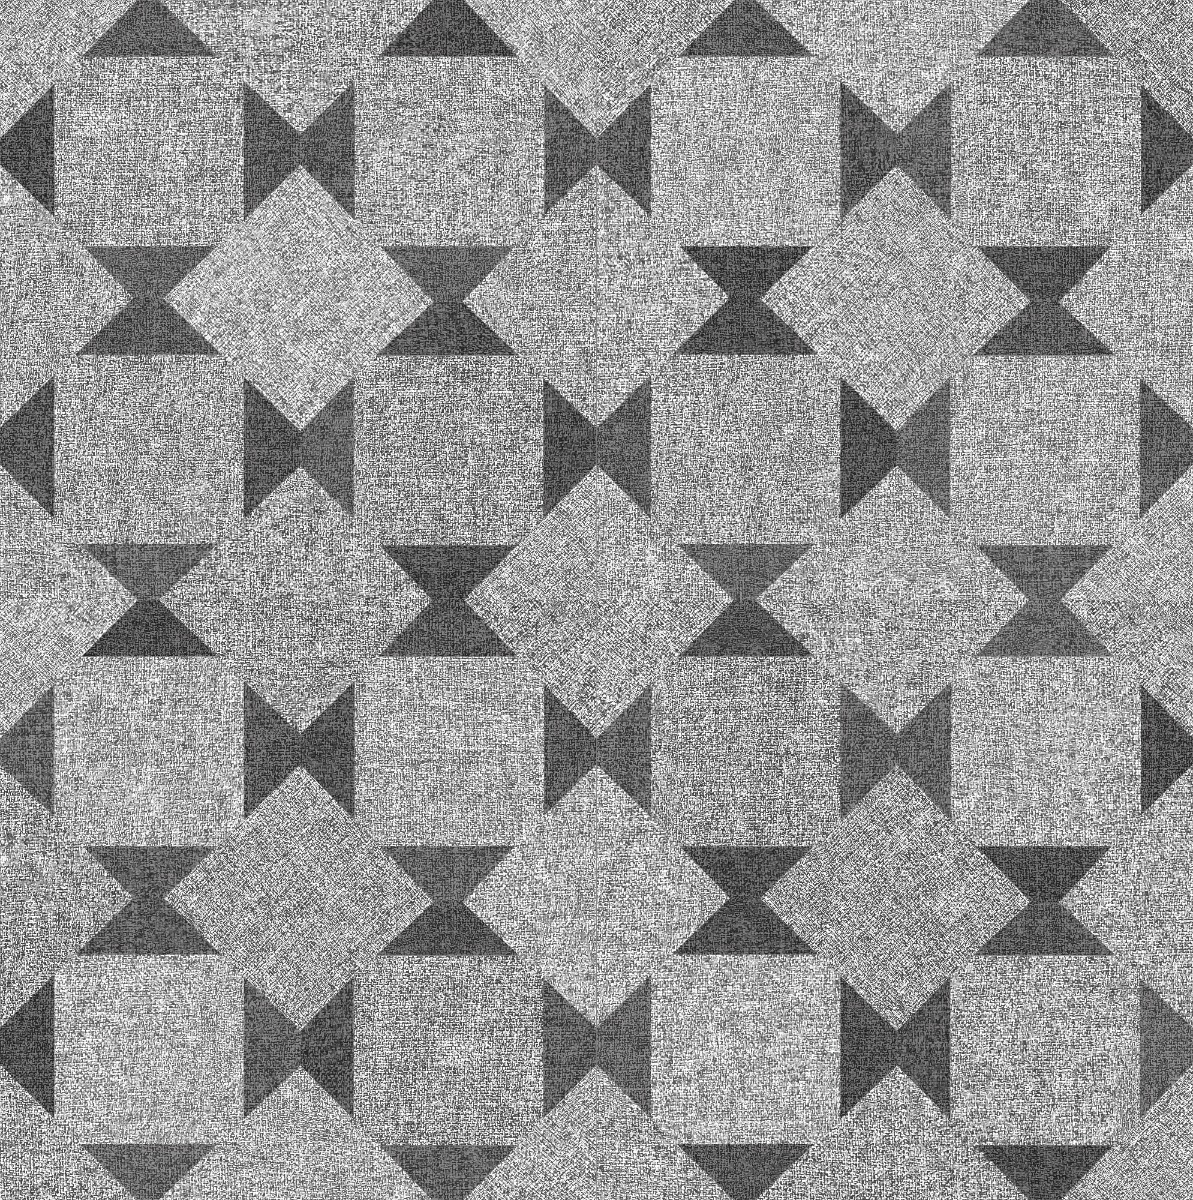 A seamless fabric texture with grey oxford weave units arranged in a Diamond Weave pattern